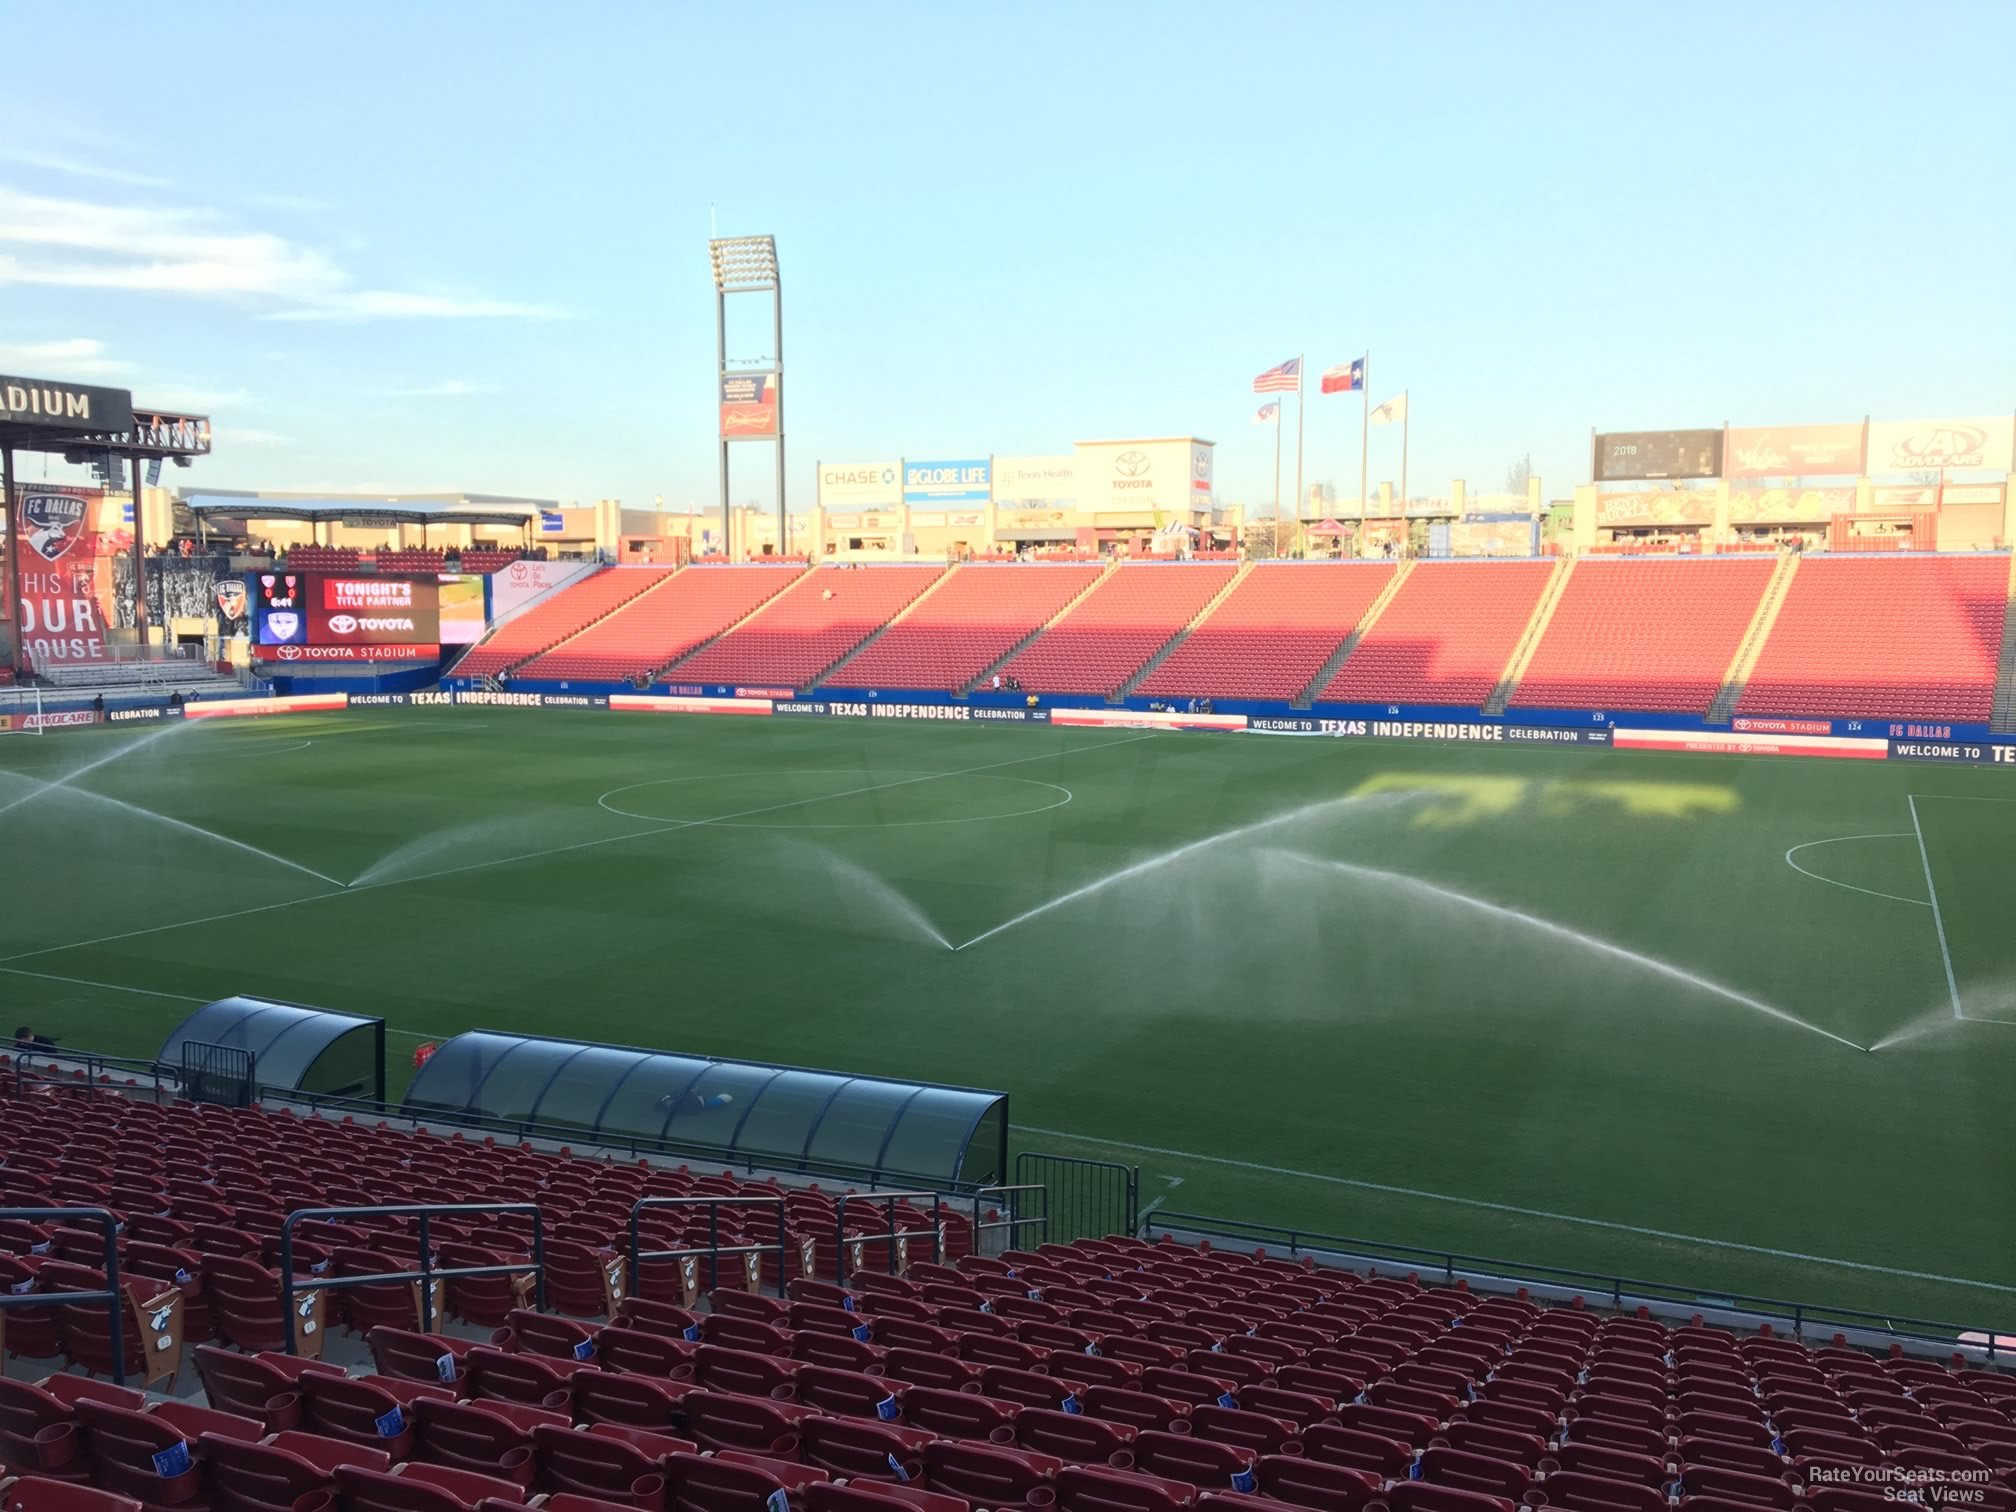 section 109, row 19 seat view  for soccer - toyota stadium